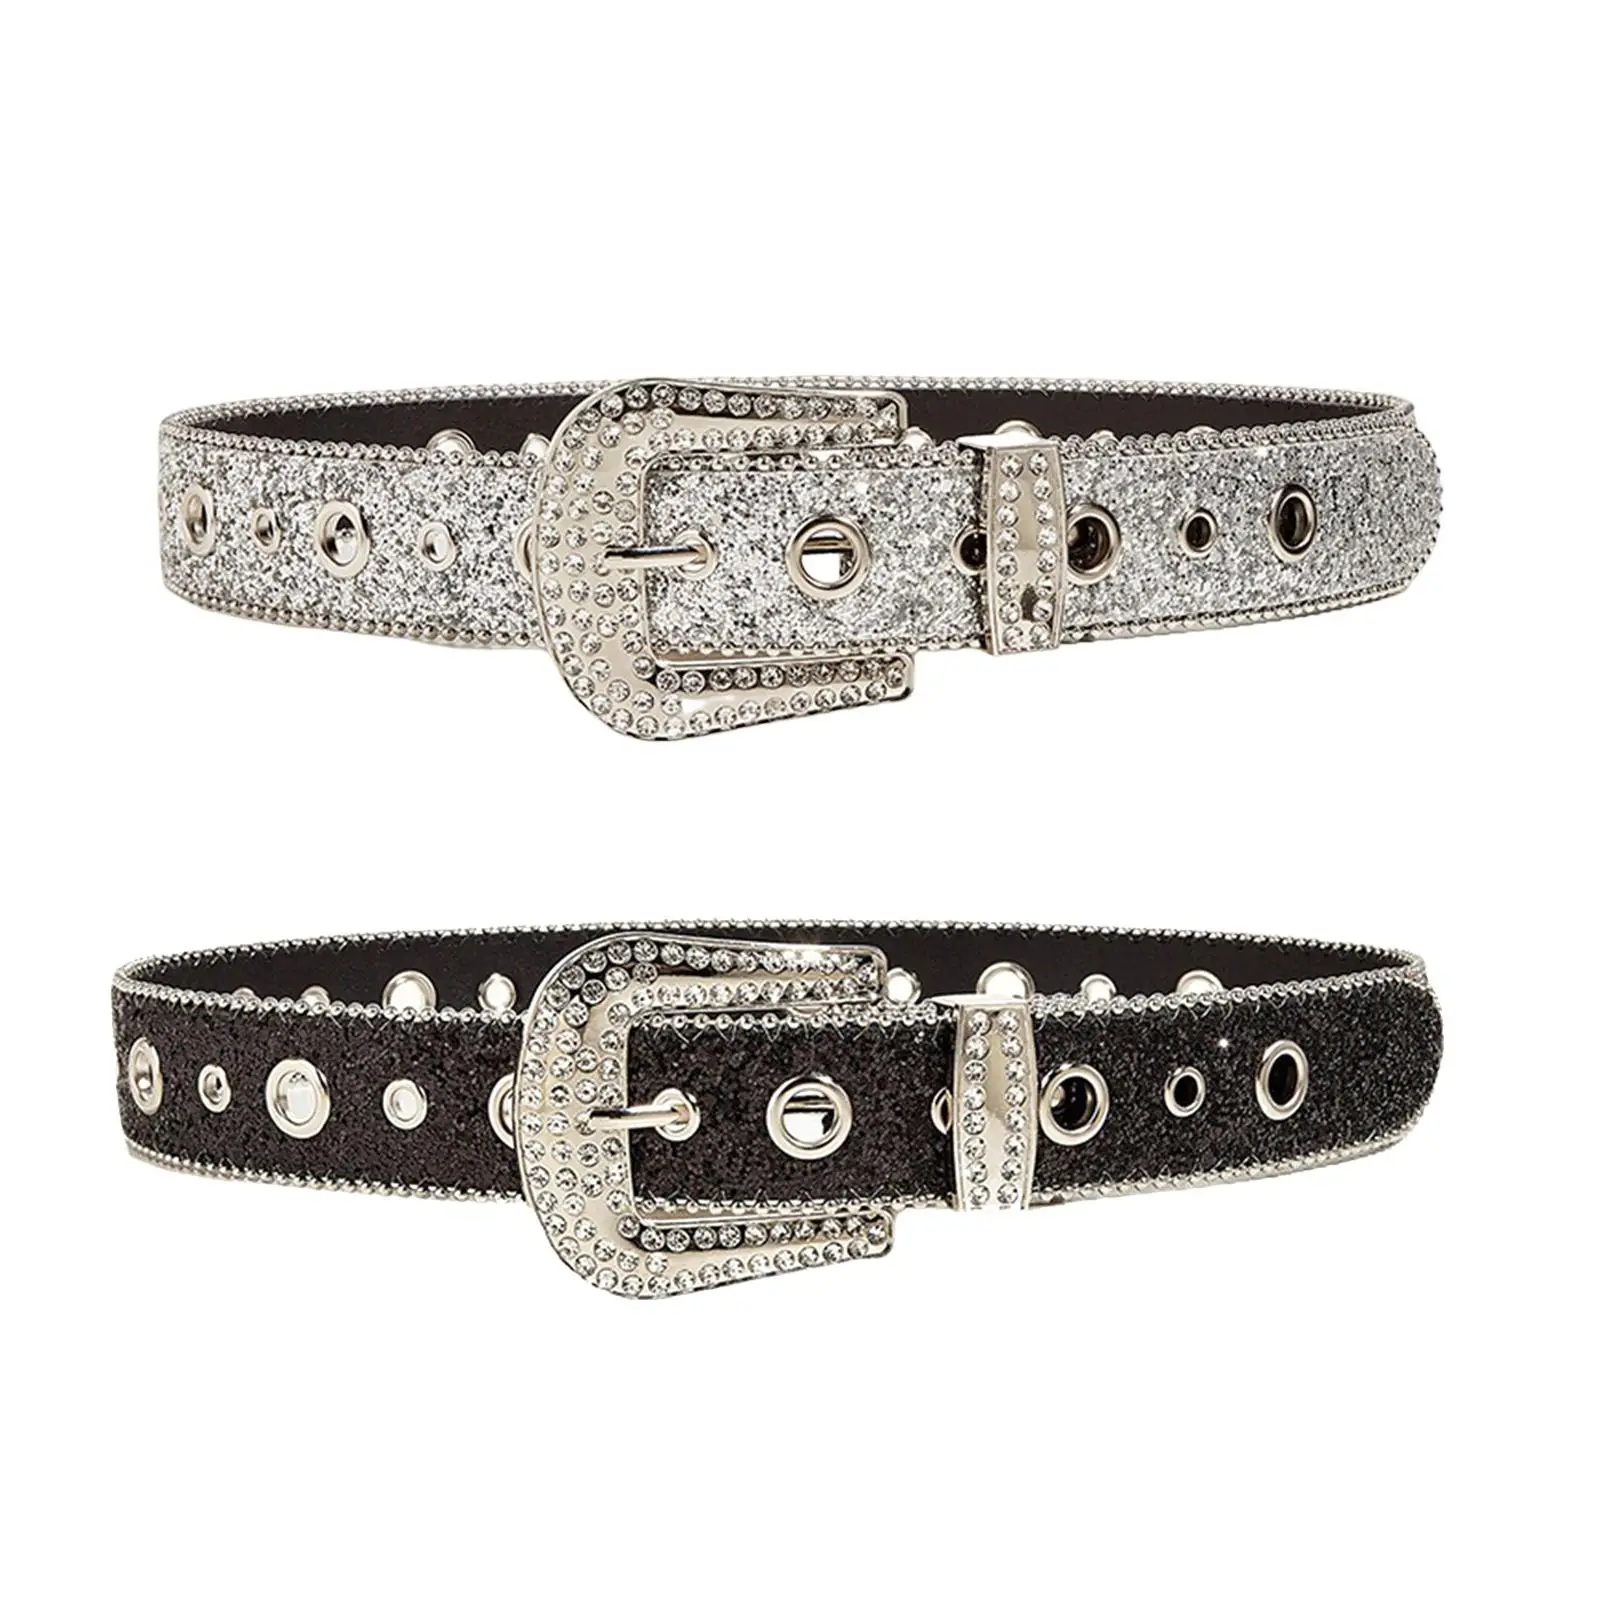 Women Belt Casual Sparkling Pin Buckle PU Leather Adjustable Rock Cowgirl Leather Belt for Evening Dresses Accessories Prom Men